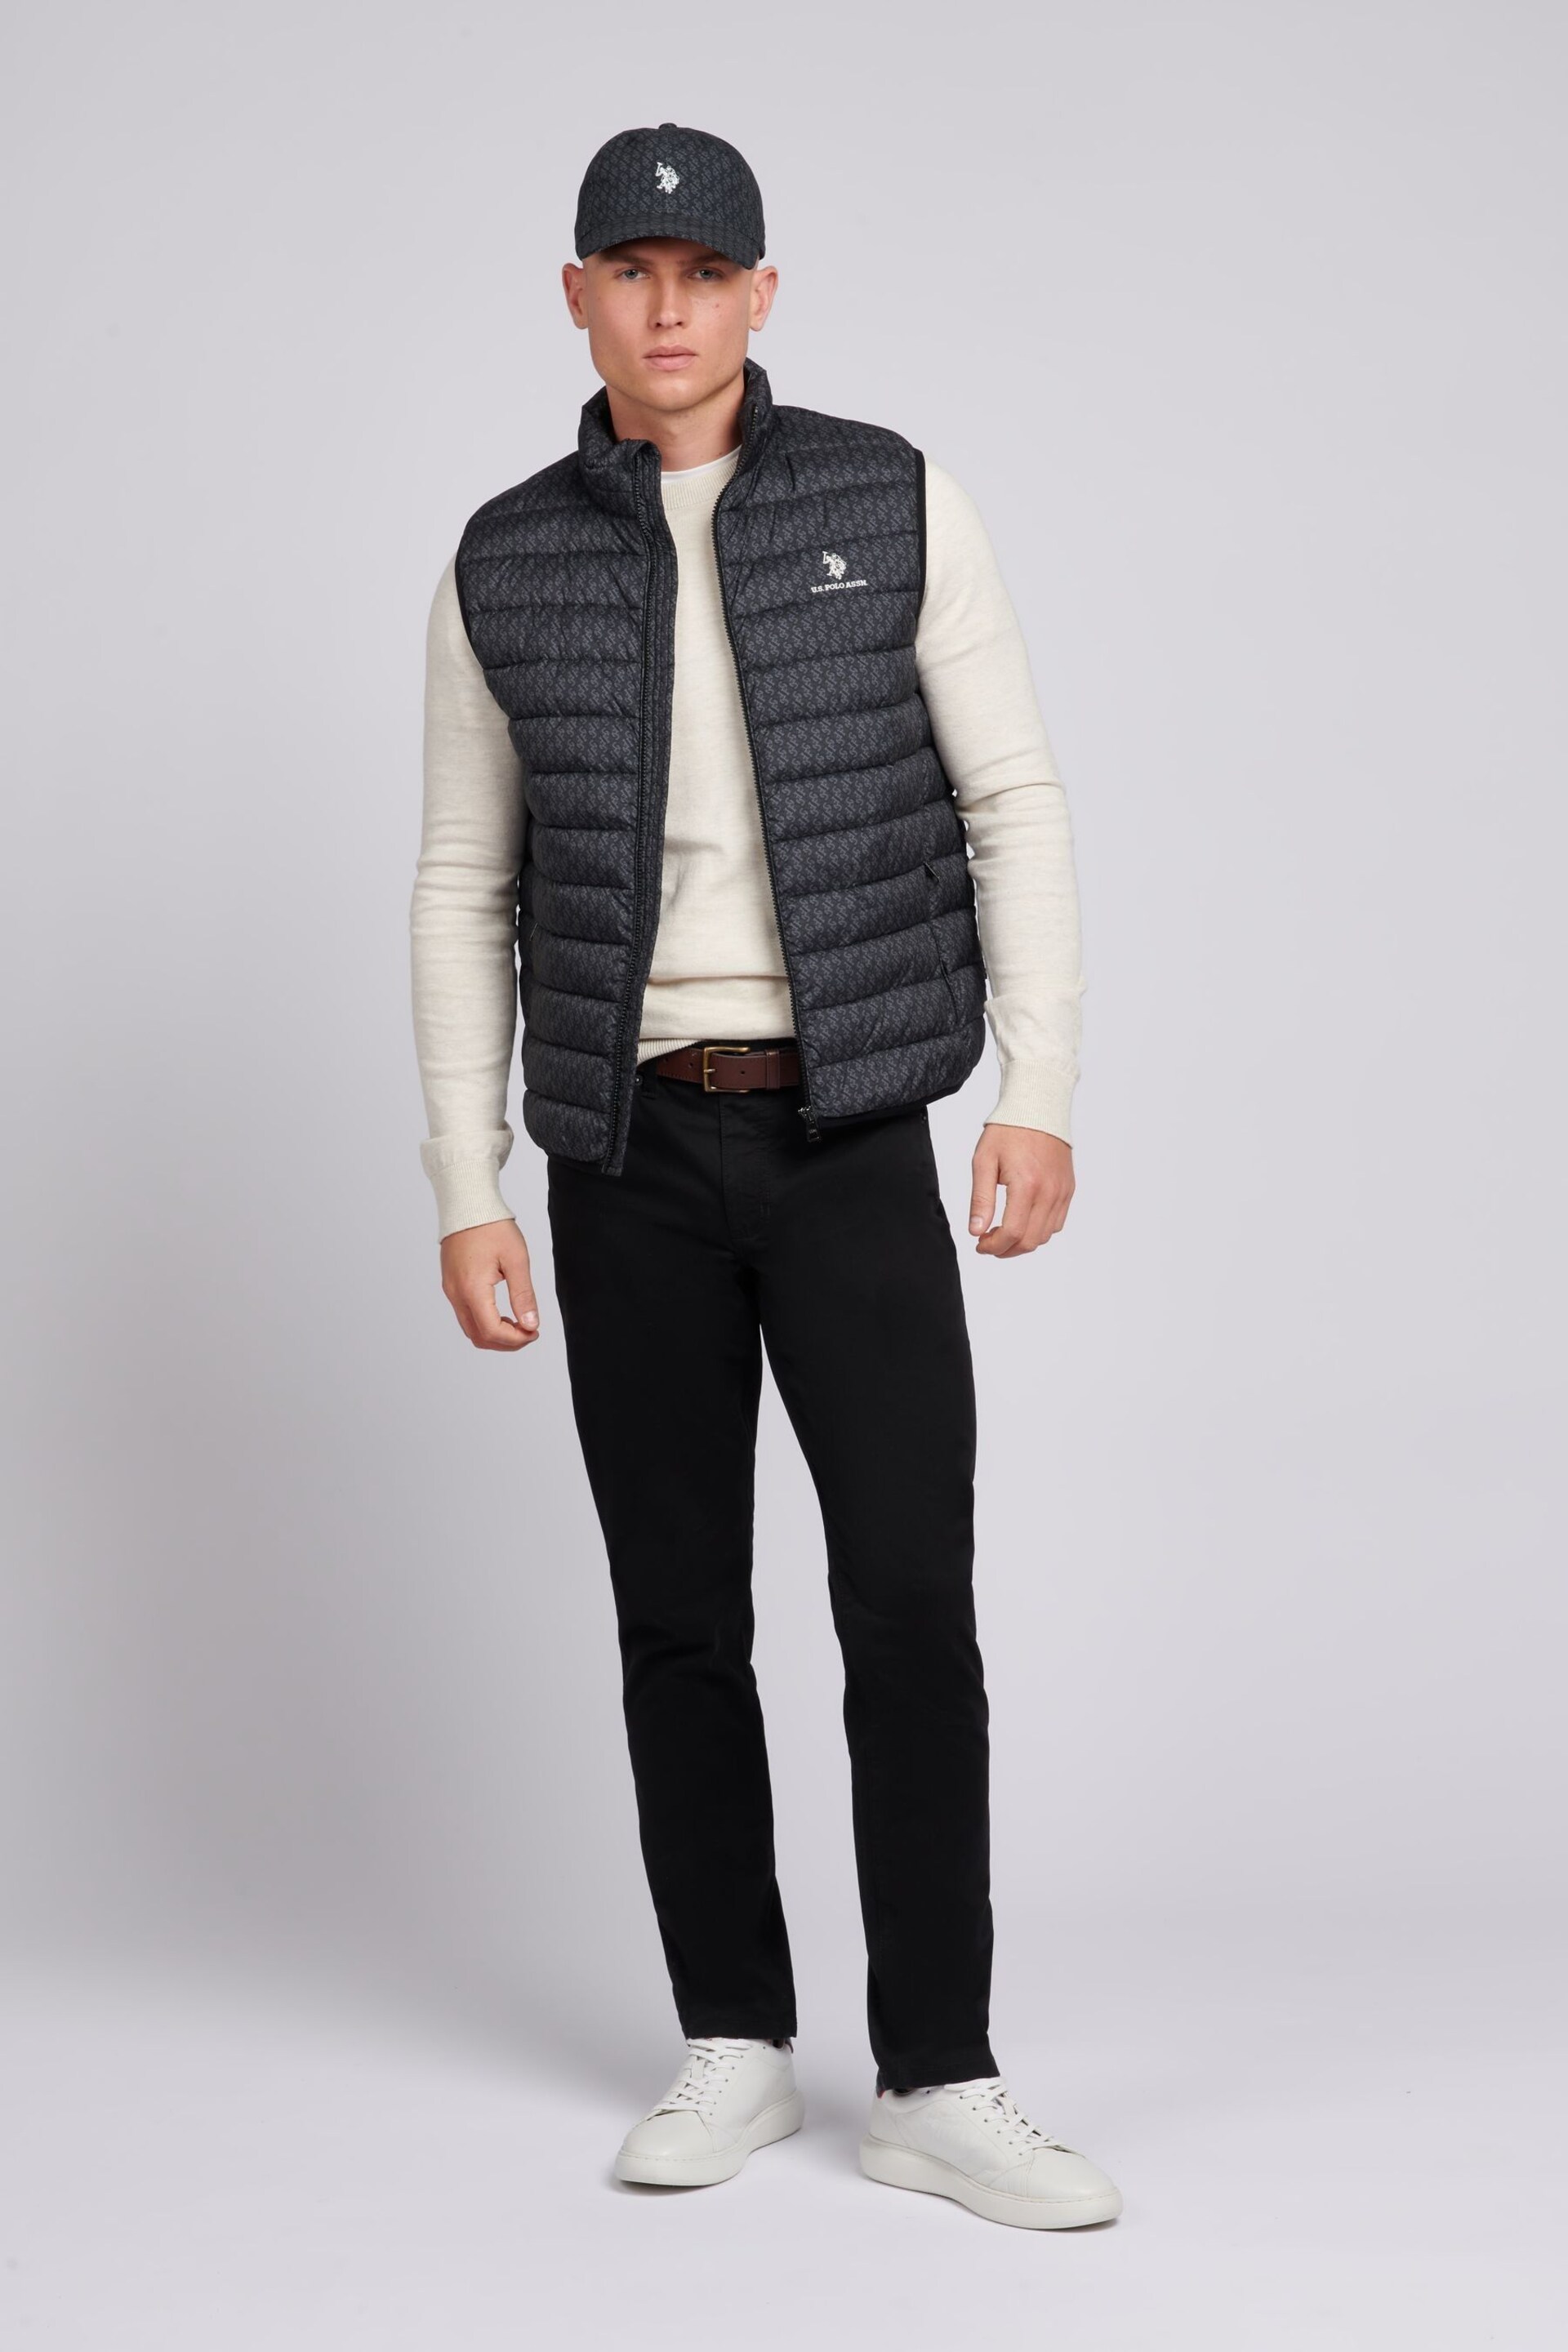 U.S. Polo Assn. Mens Monogram Quilted Black Gilet - Image 3 of 7